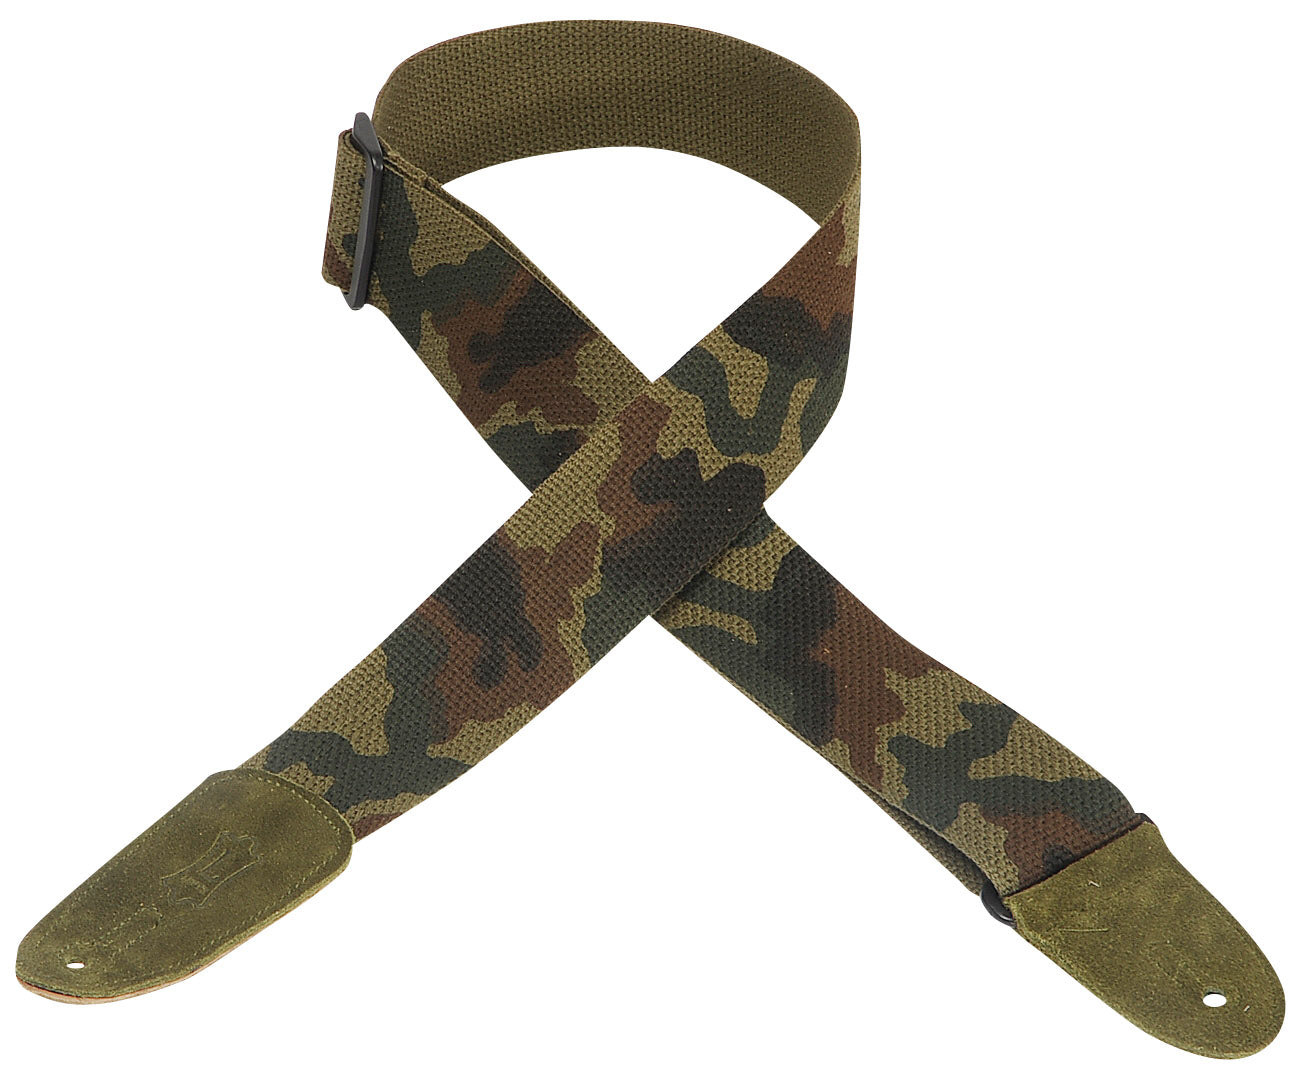 LEVY'S 2" COTTON GUITAR STRAP WITH SUEDE ENDS- CAMO